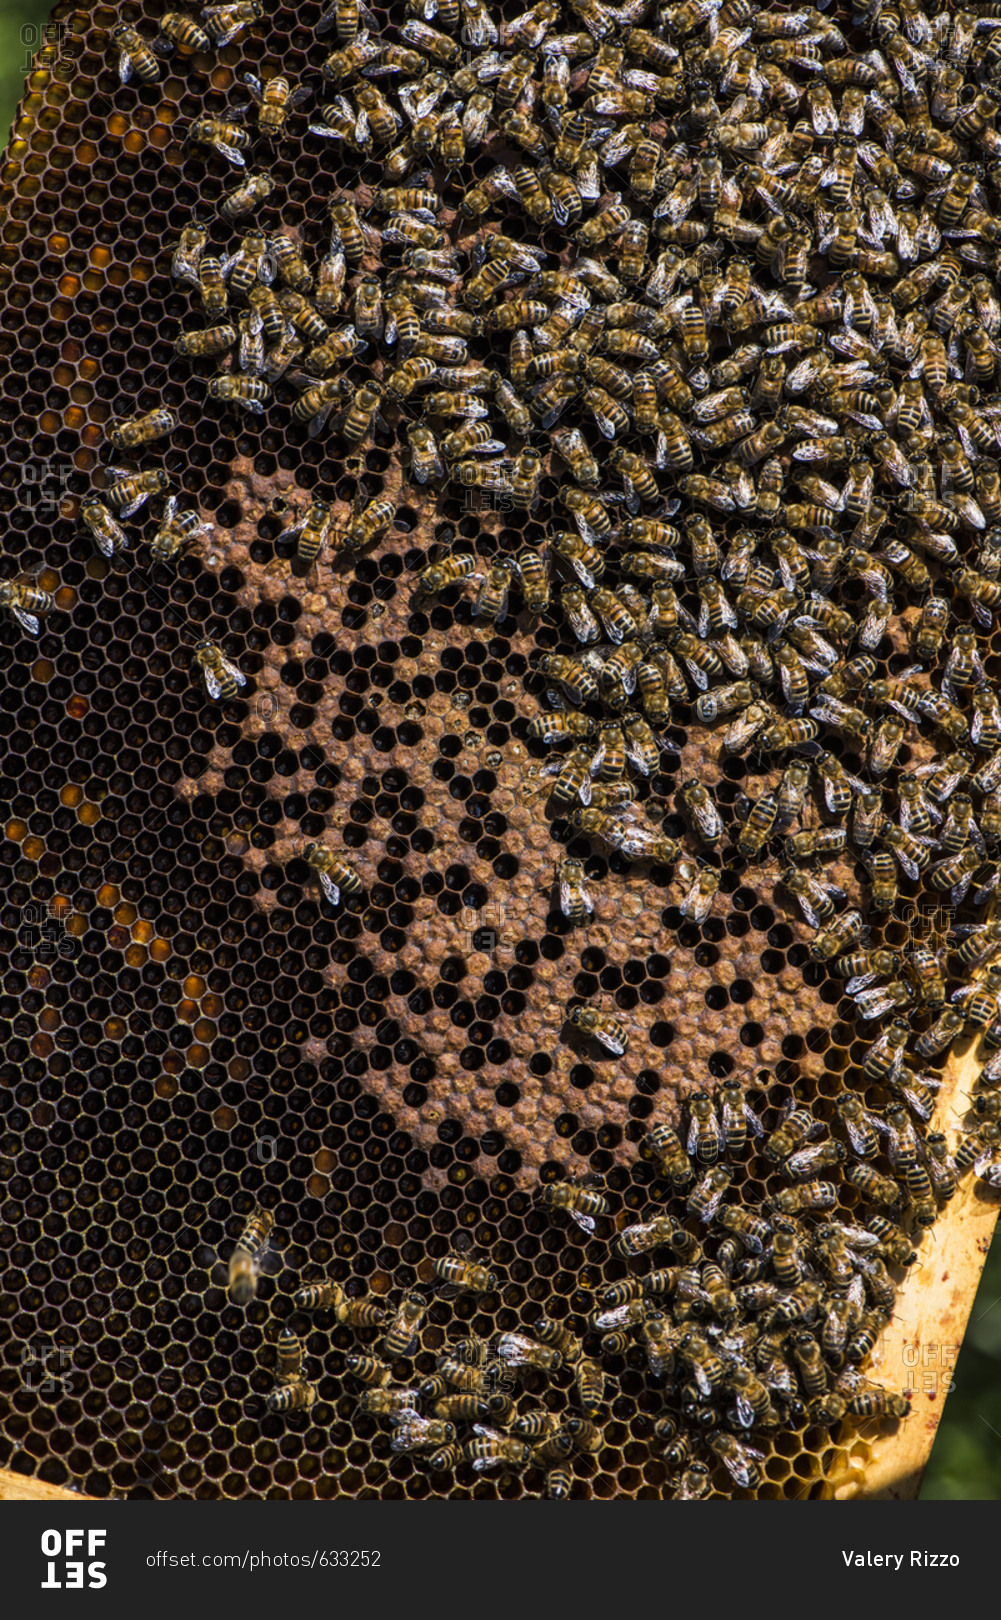 Beehive frame with bees and honey